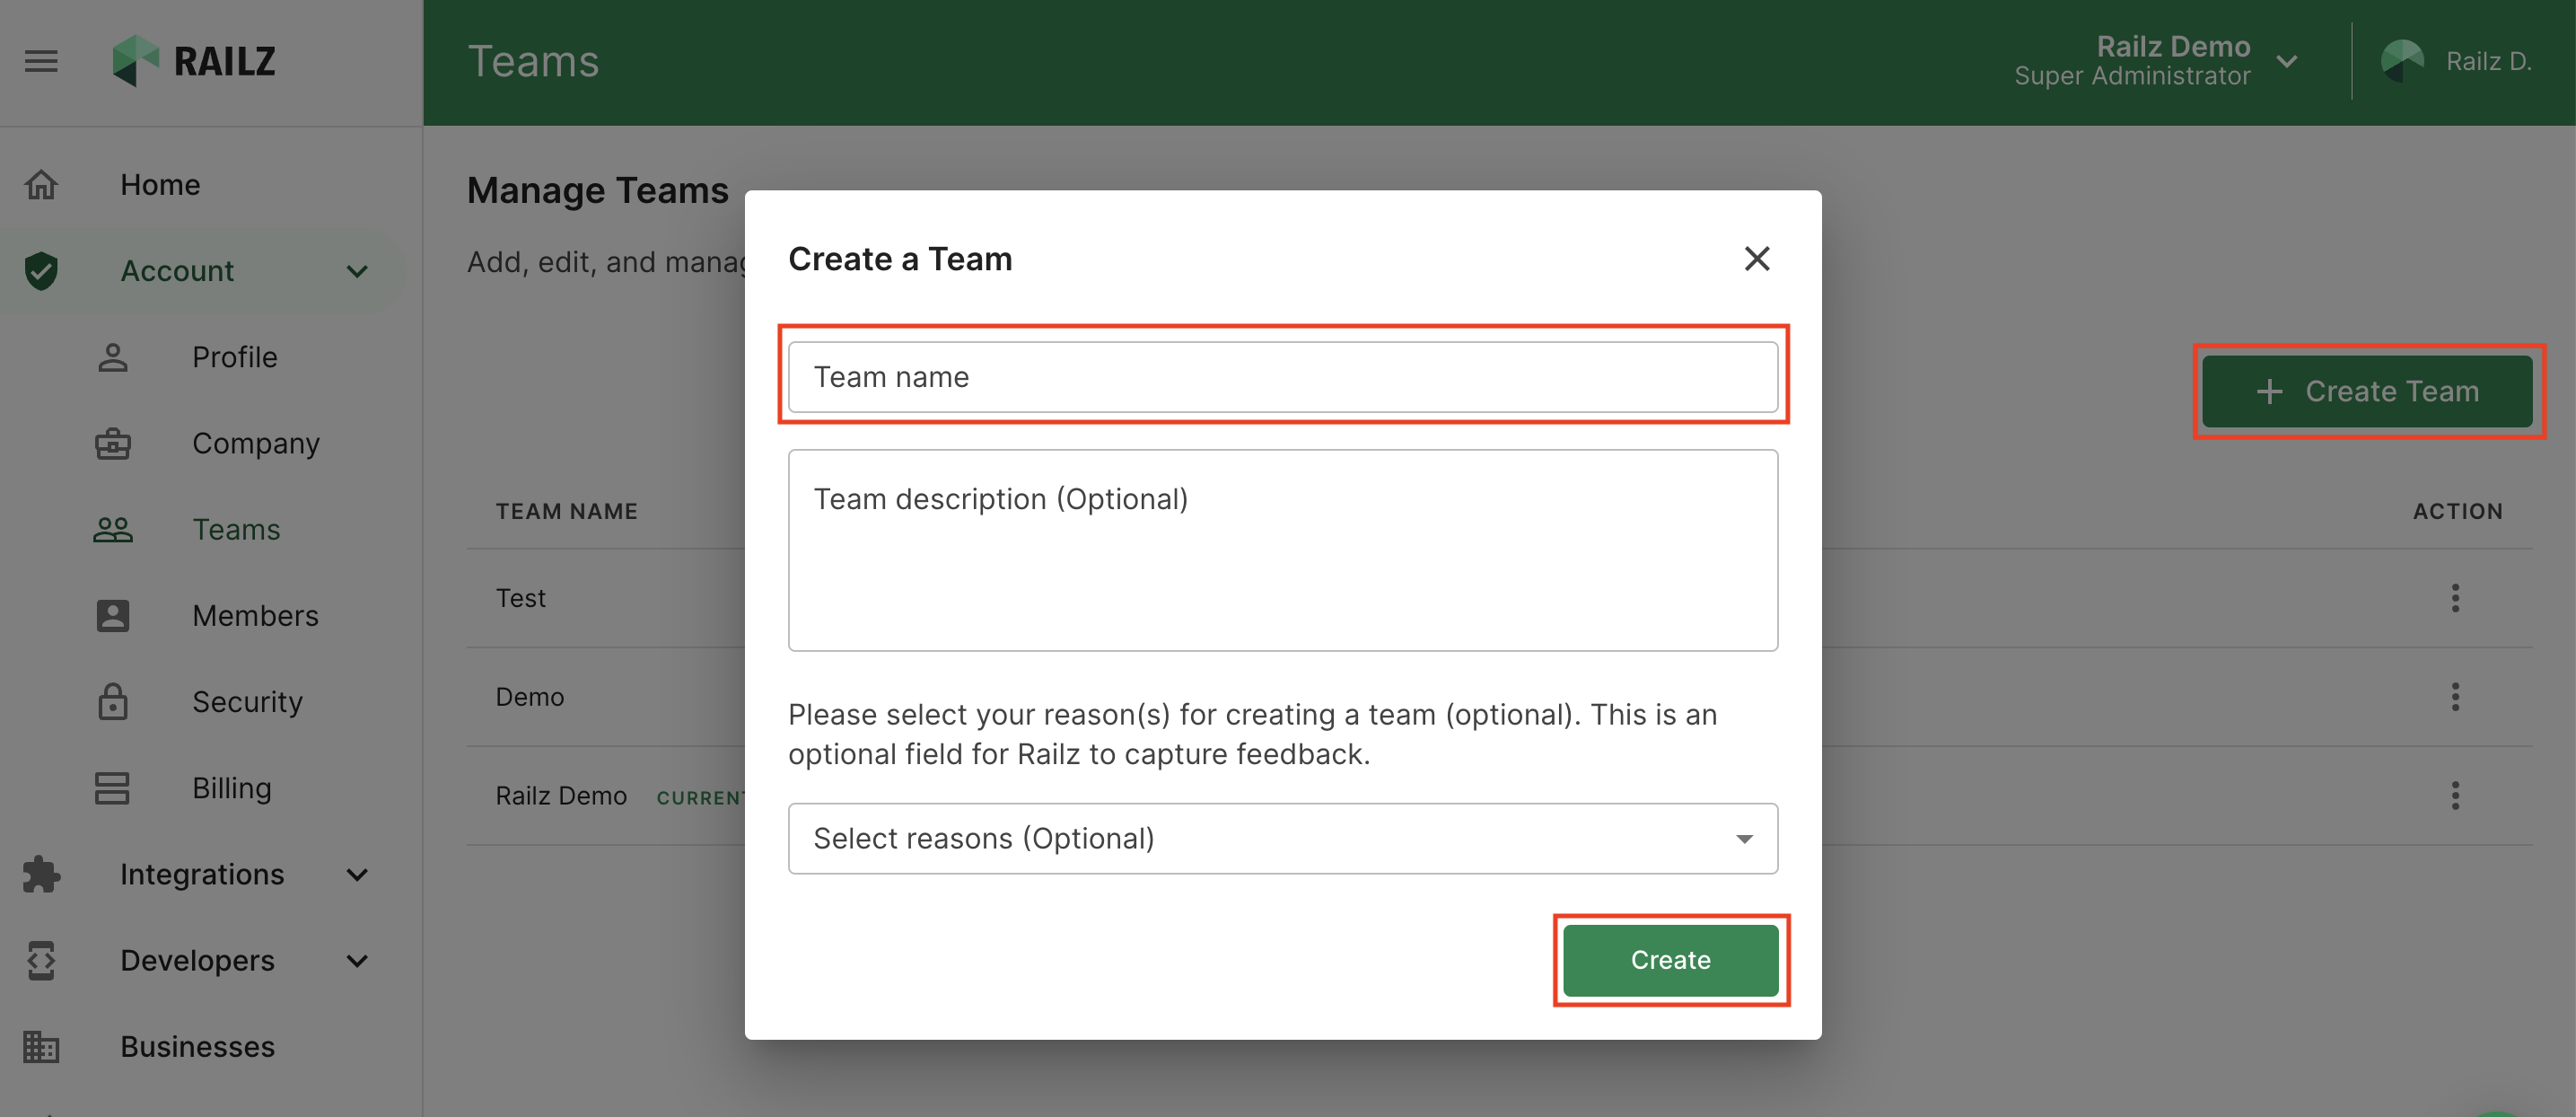 Manage team page in Railz Dashboard. Click to Expand.